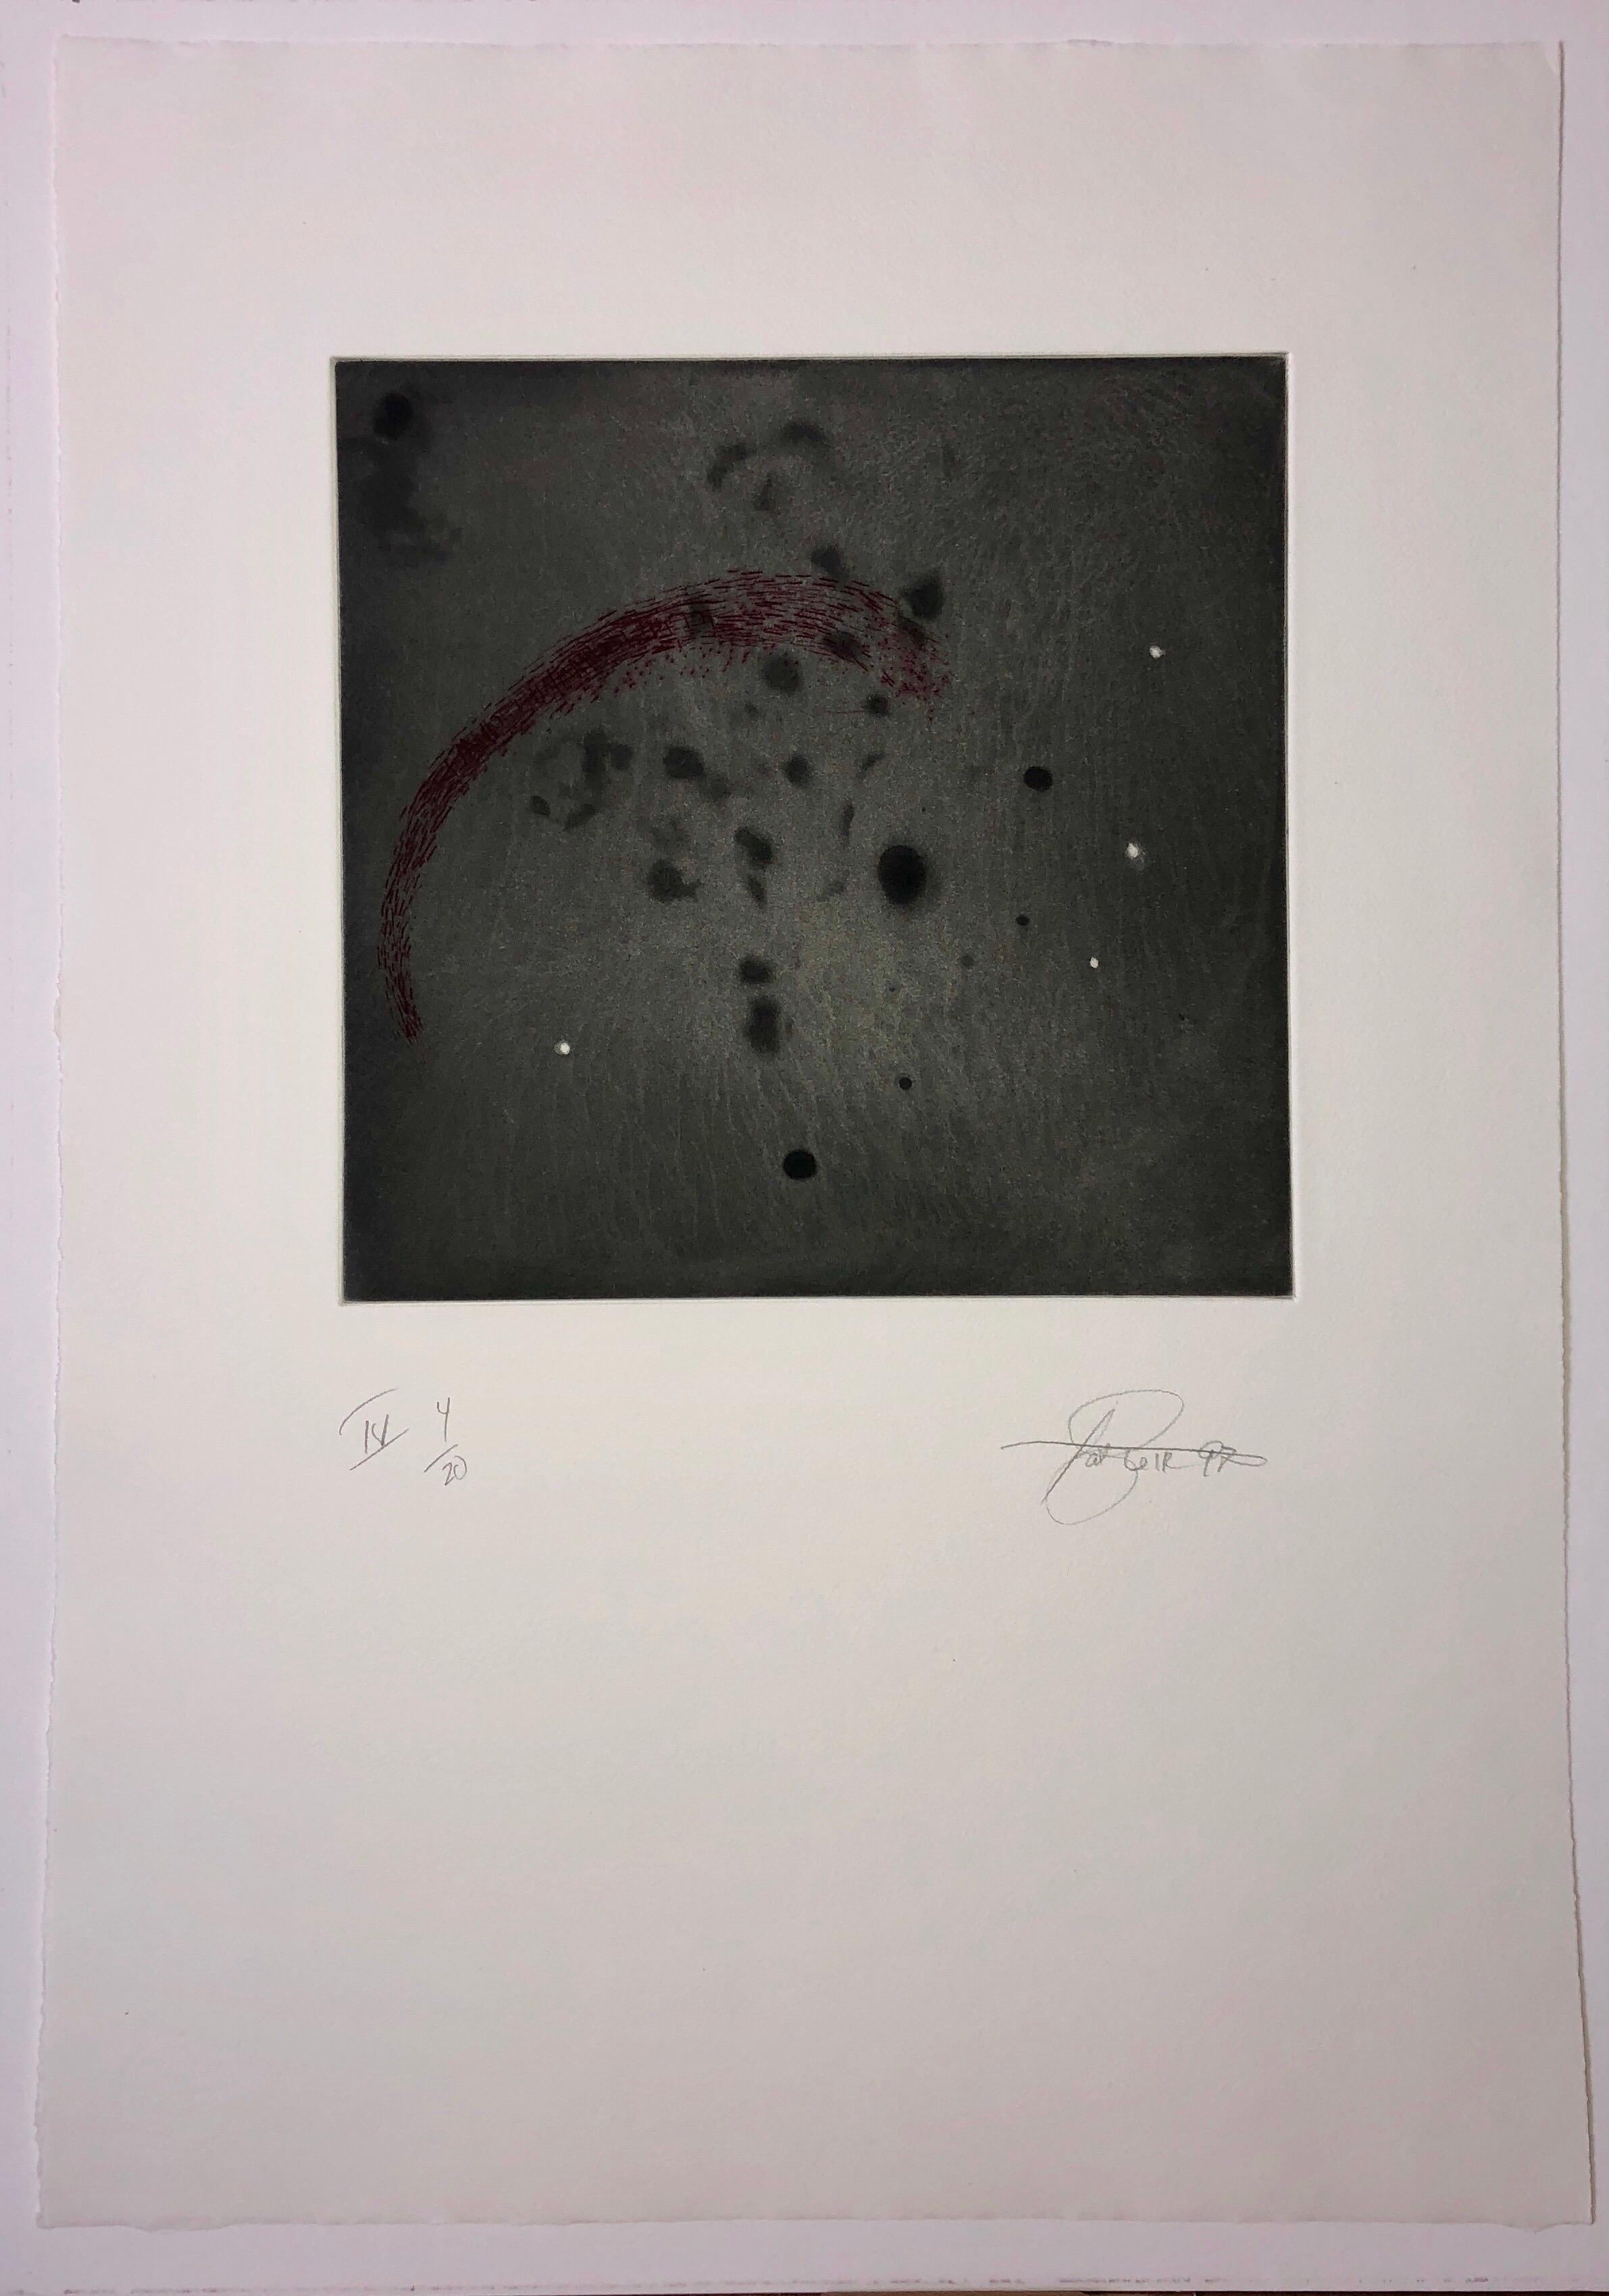 Comet, Outer Space Dark Series Aquatint Etching Color Abstract Expressionist  For Sale 3